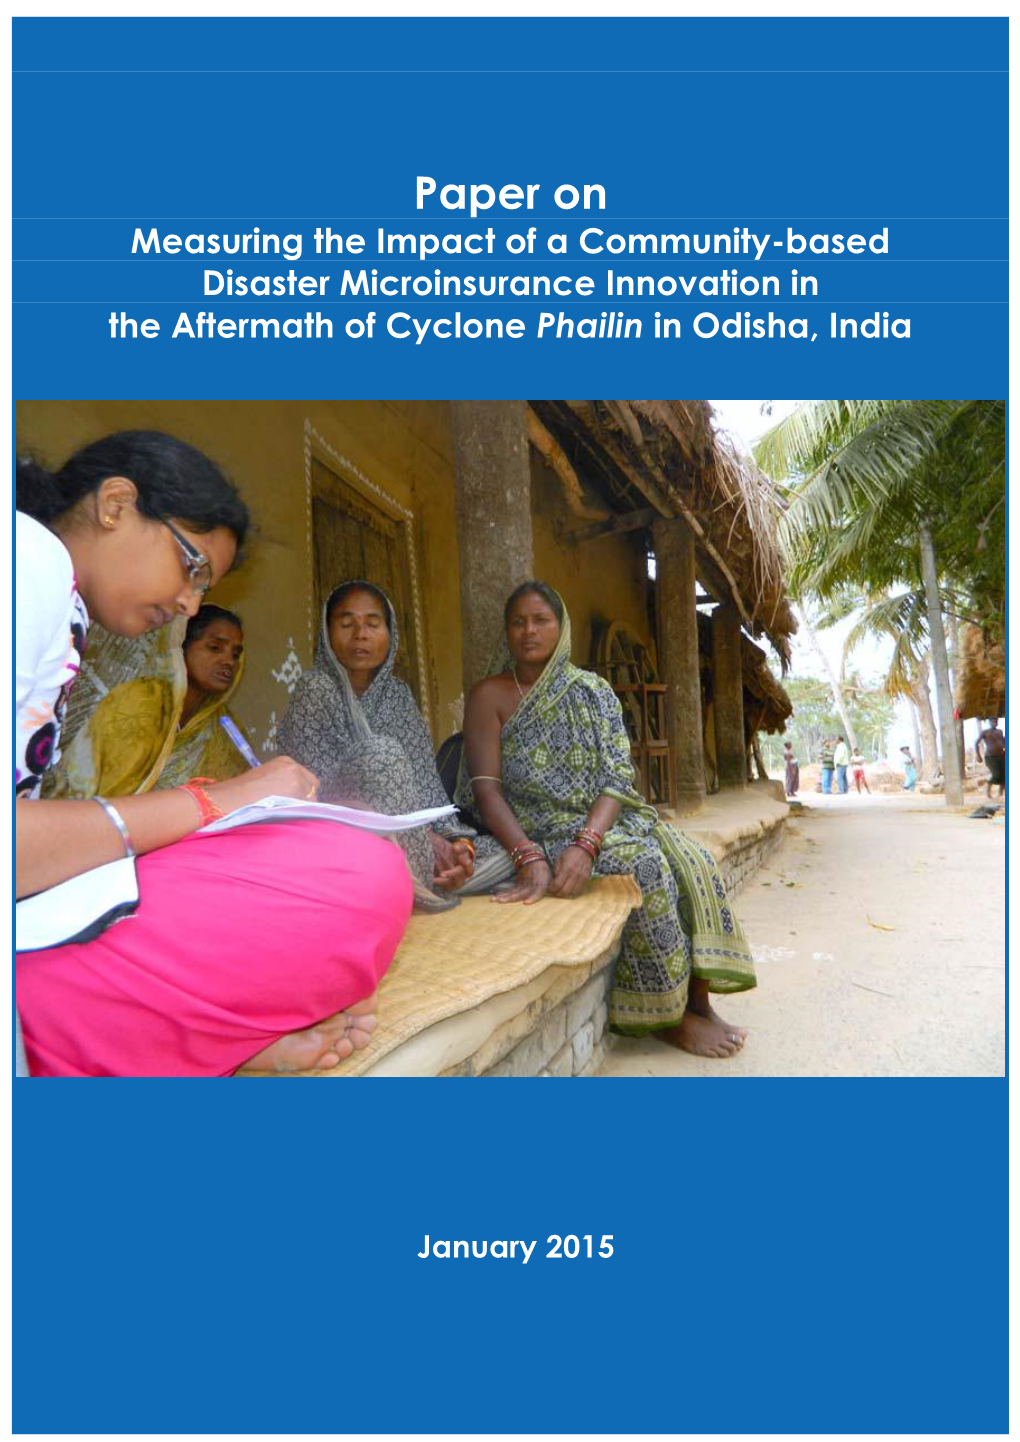 Paper on Measuring the Impact of a Community-Based Disaster Microinsurance Innovation in the Aftermath of Cyclone Phailin in Odisha, India